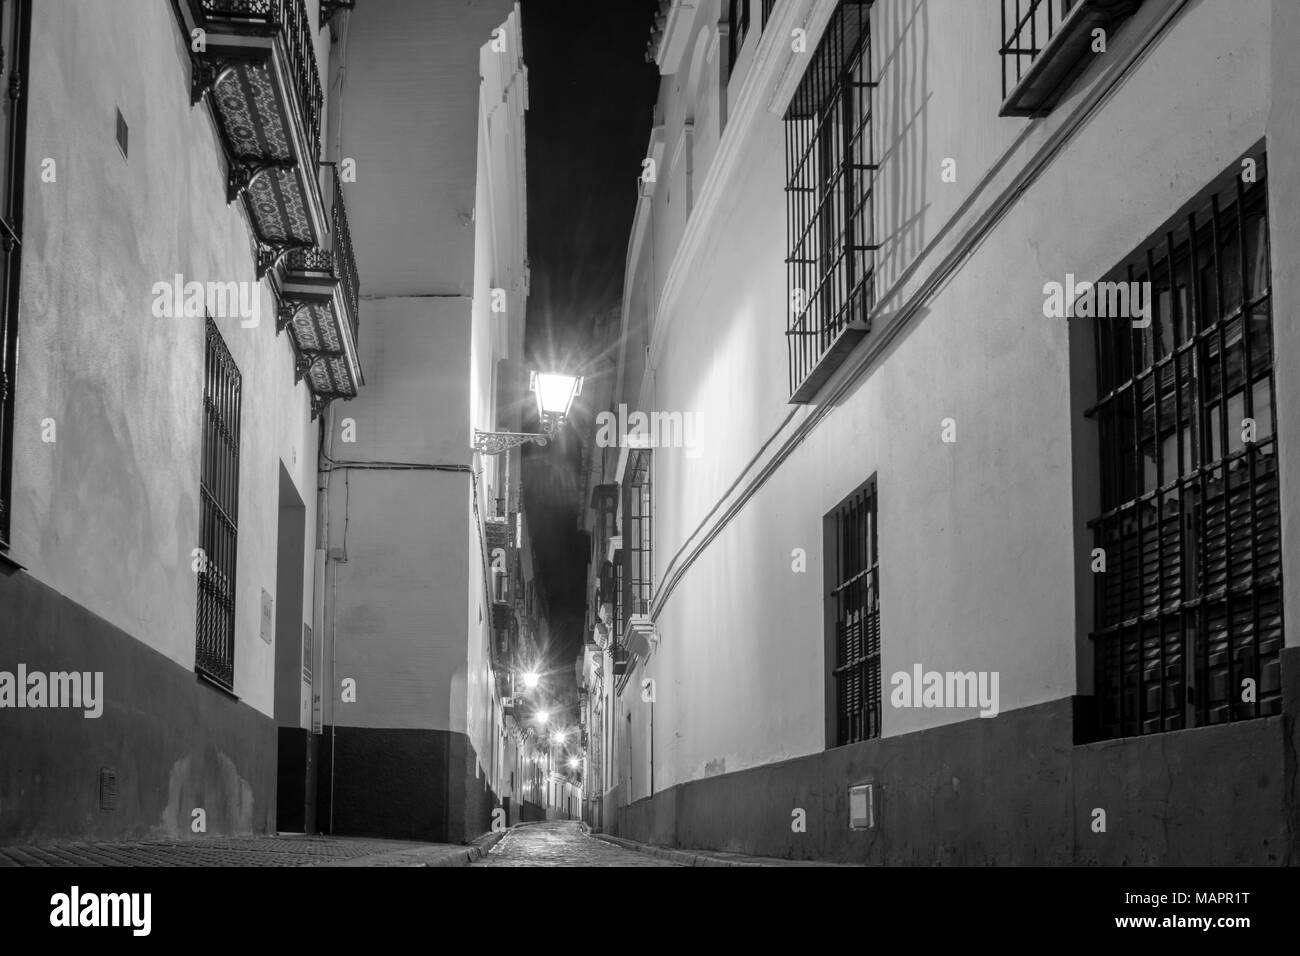 Monochrome of a Night street scene/ view of a narrow cobbled street in the Barrio/ district Santa Cruz in Seville 2018, Andalusia, Spain Stock Photo